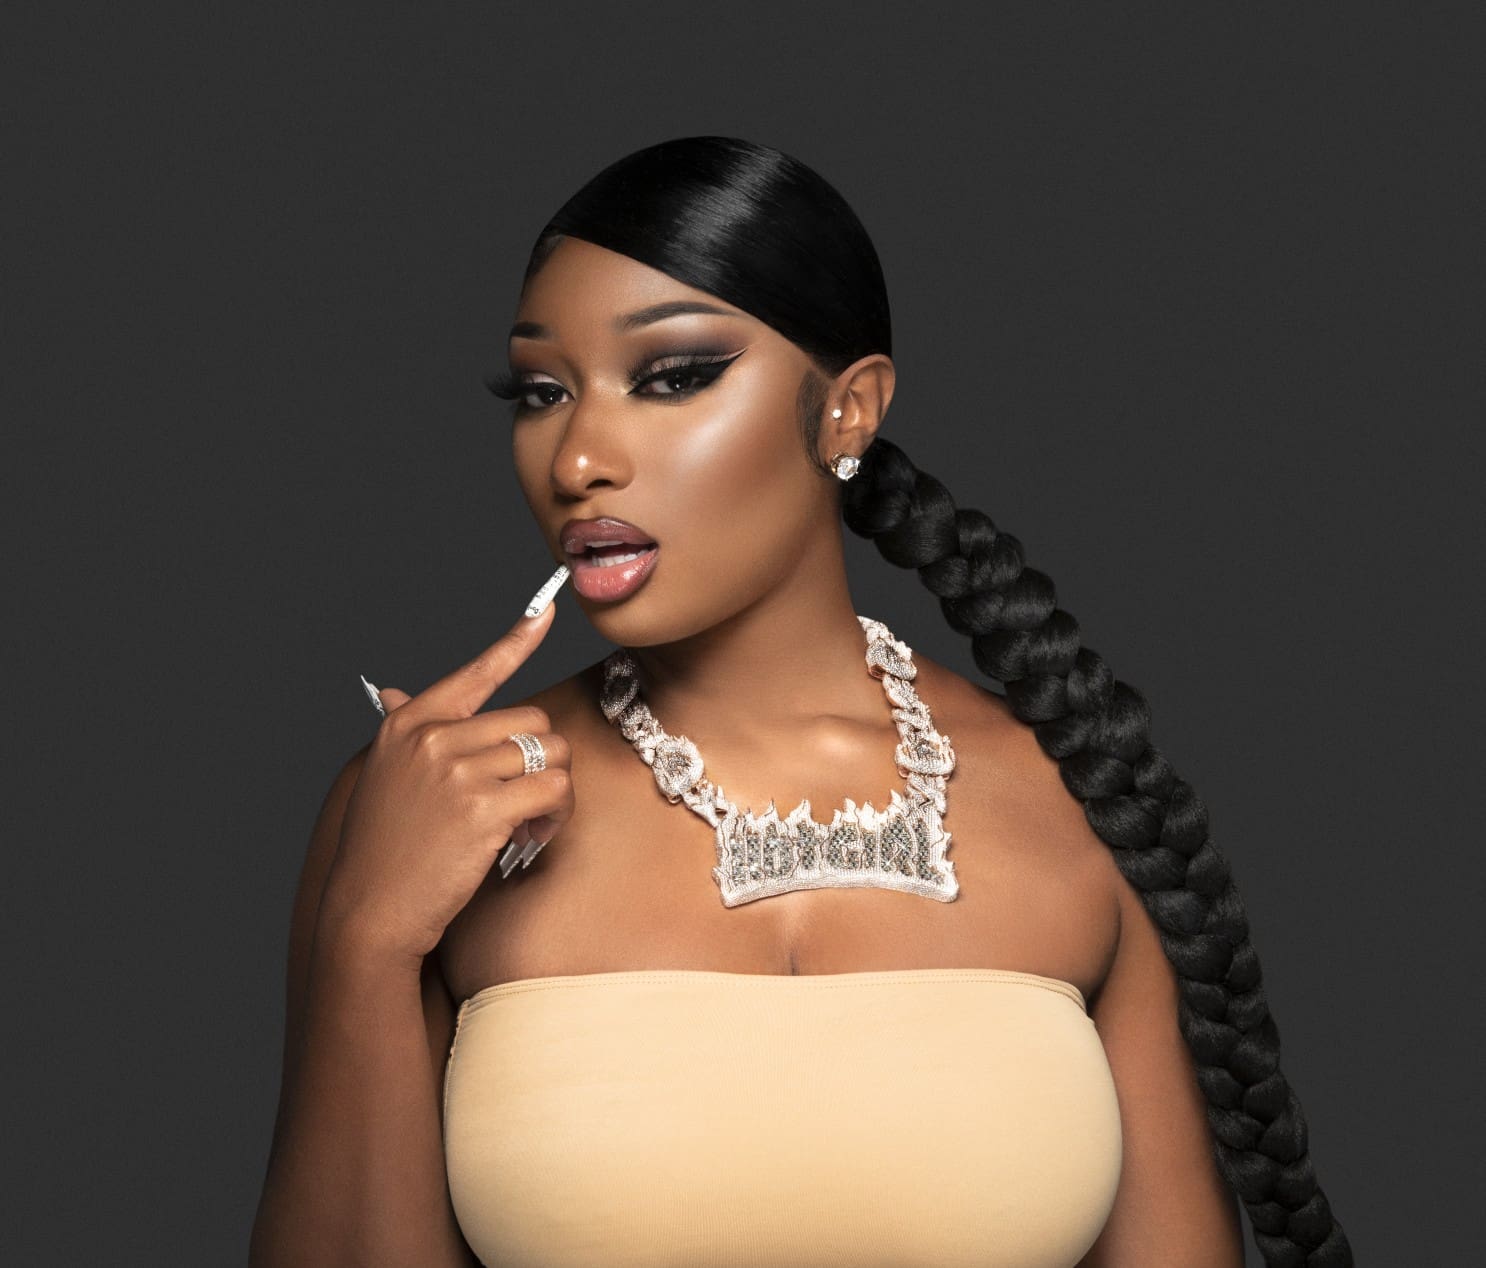 ”megan-thee-stallion-shows-off-her-collection-see-her-juicy-curves-here”